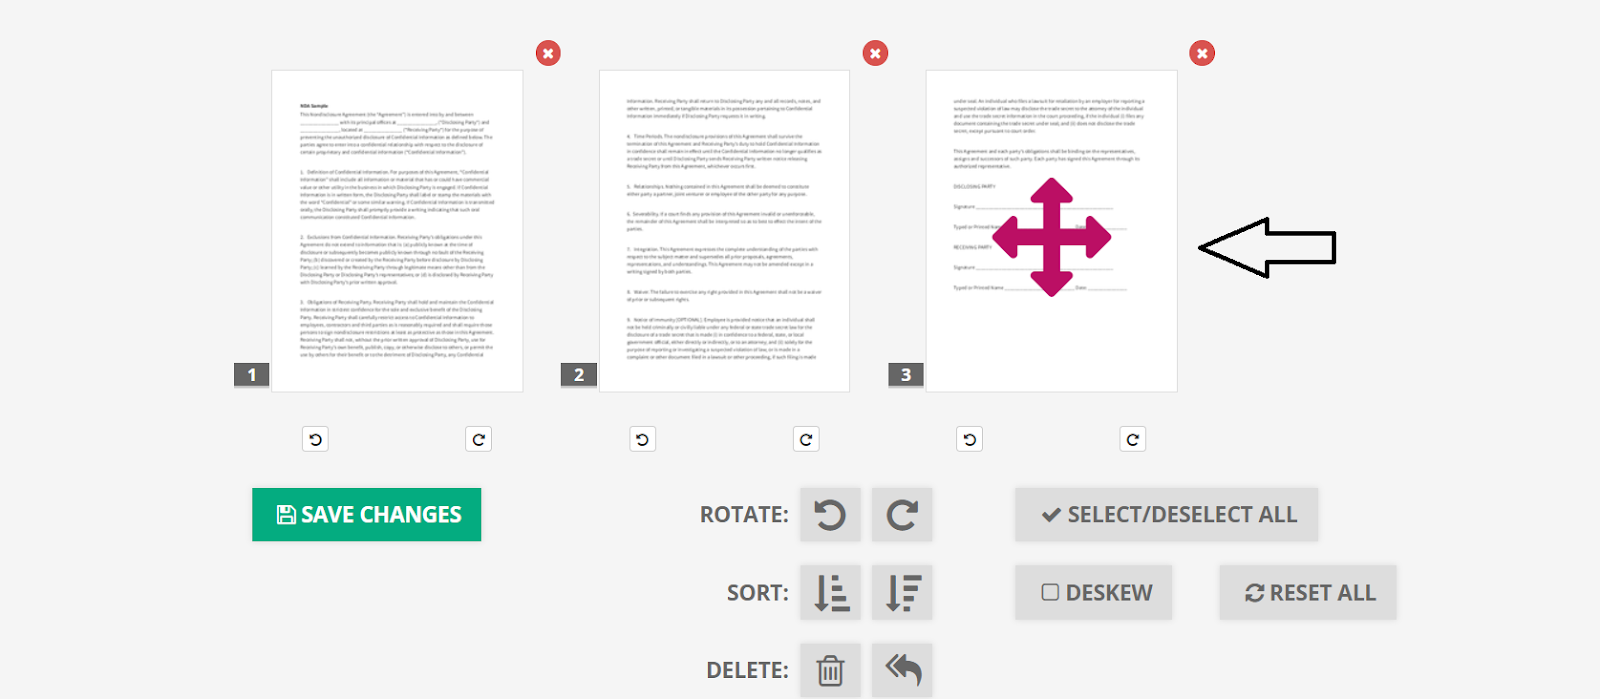 Rotate a PDF: Rotate PDF pages online for free